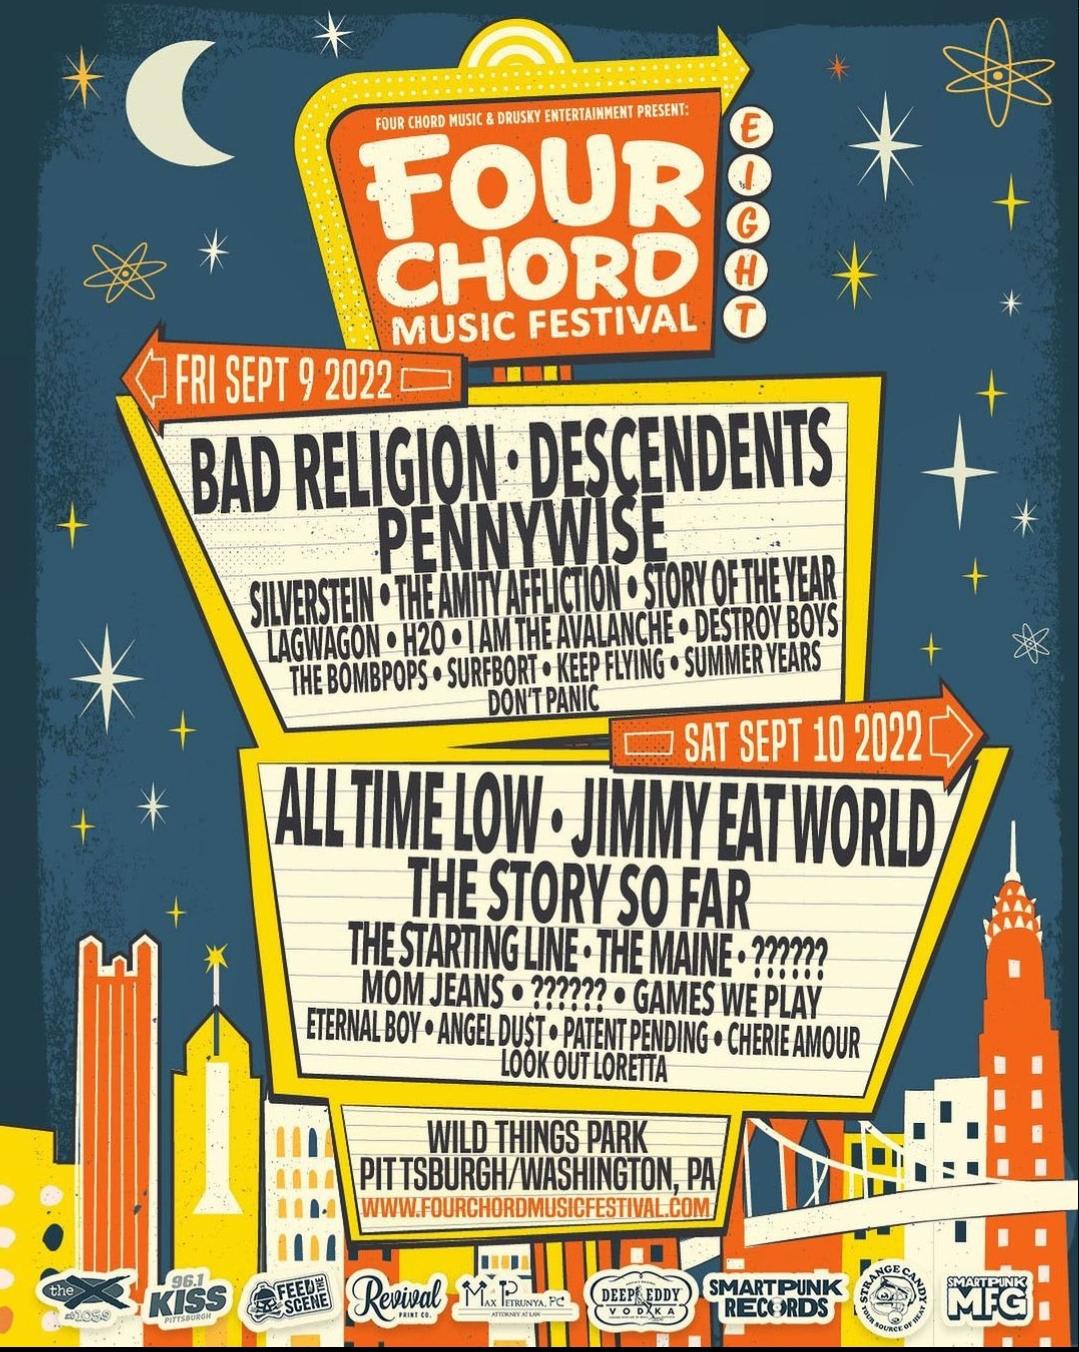 In case anyone is interested Bad Religion, Descendents, Pennywise, and Lagwagon will be playing Four Chords fest in September. Tickets go on sale now for early birds. General goes on sale Friday